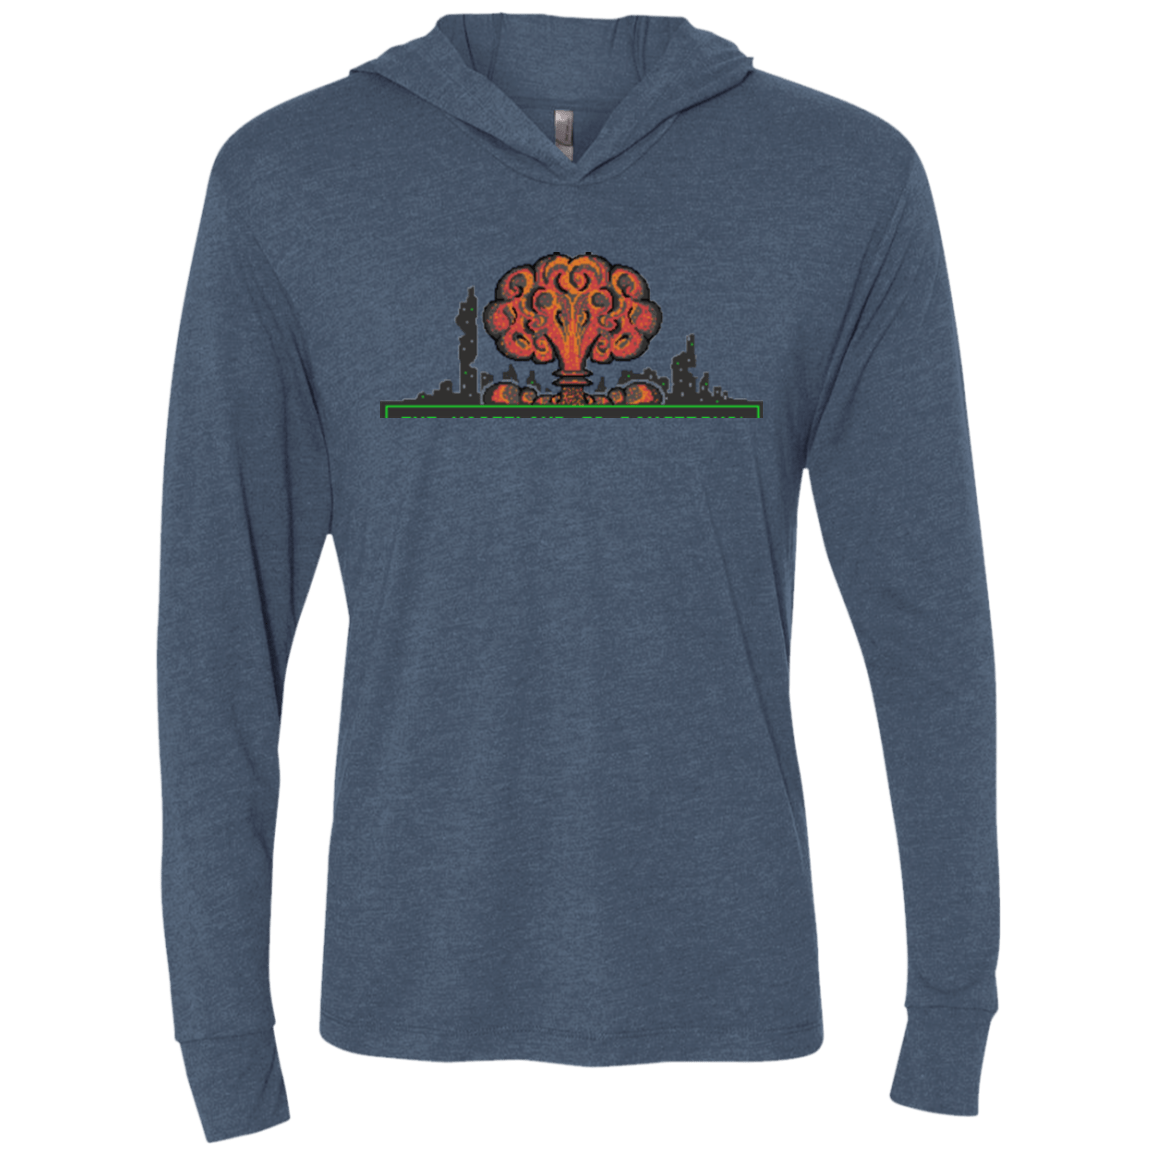 T-Shirts Indigo / X-Small The Wasteland is Dangerous Triblend Long Sleeve Hoodie Tee